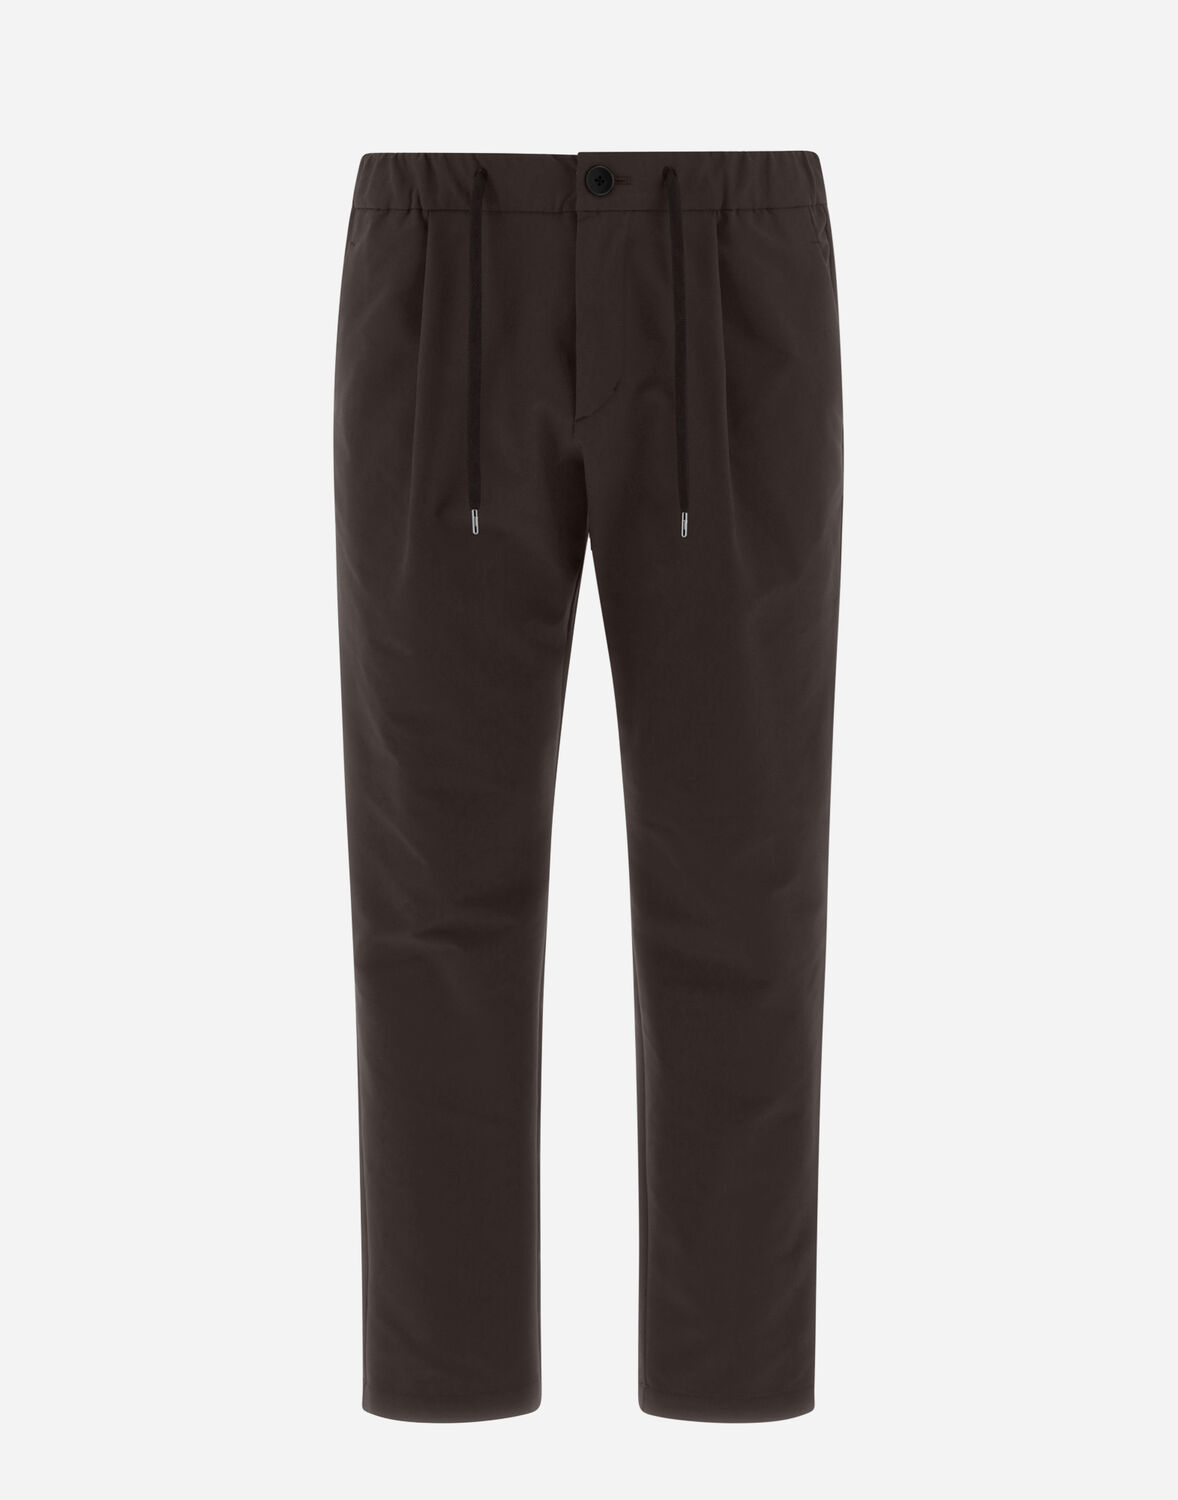 Herno Warm Tech Trousers - Male Trousers Dark Brown Xxl In ダークブラウン